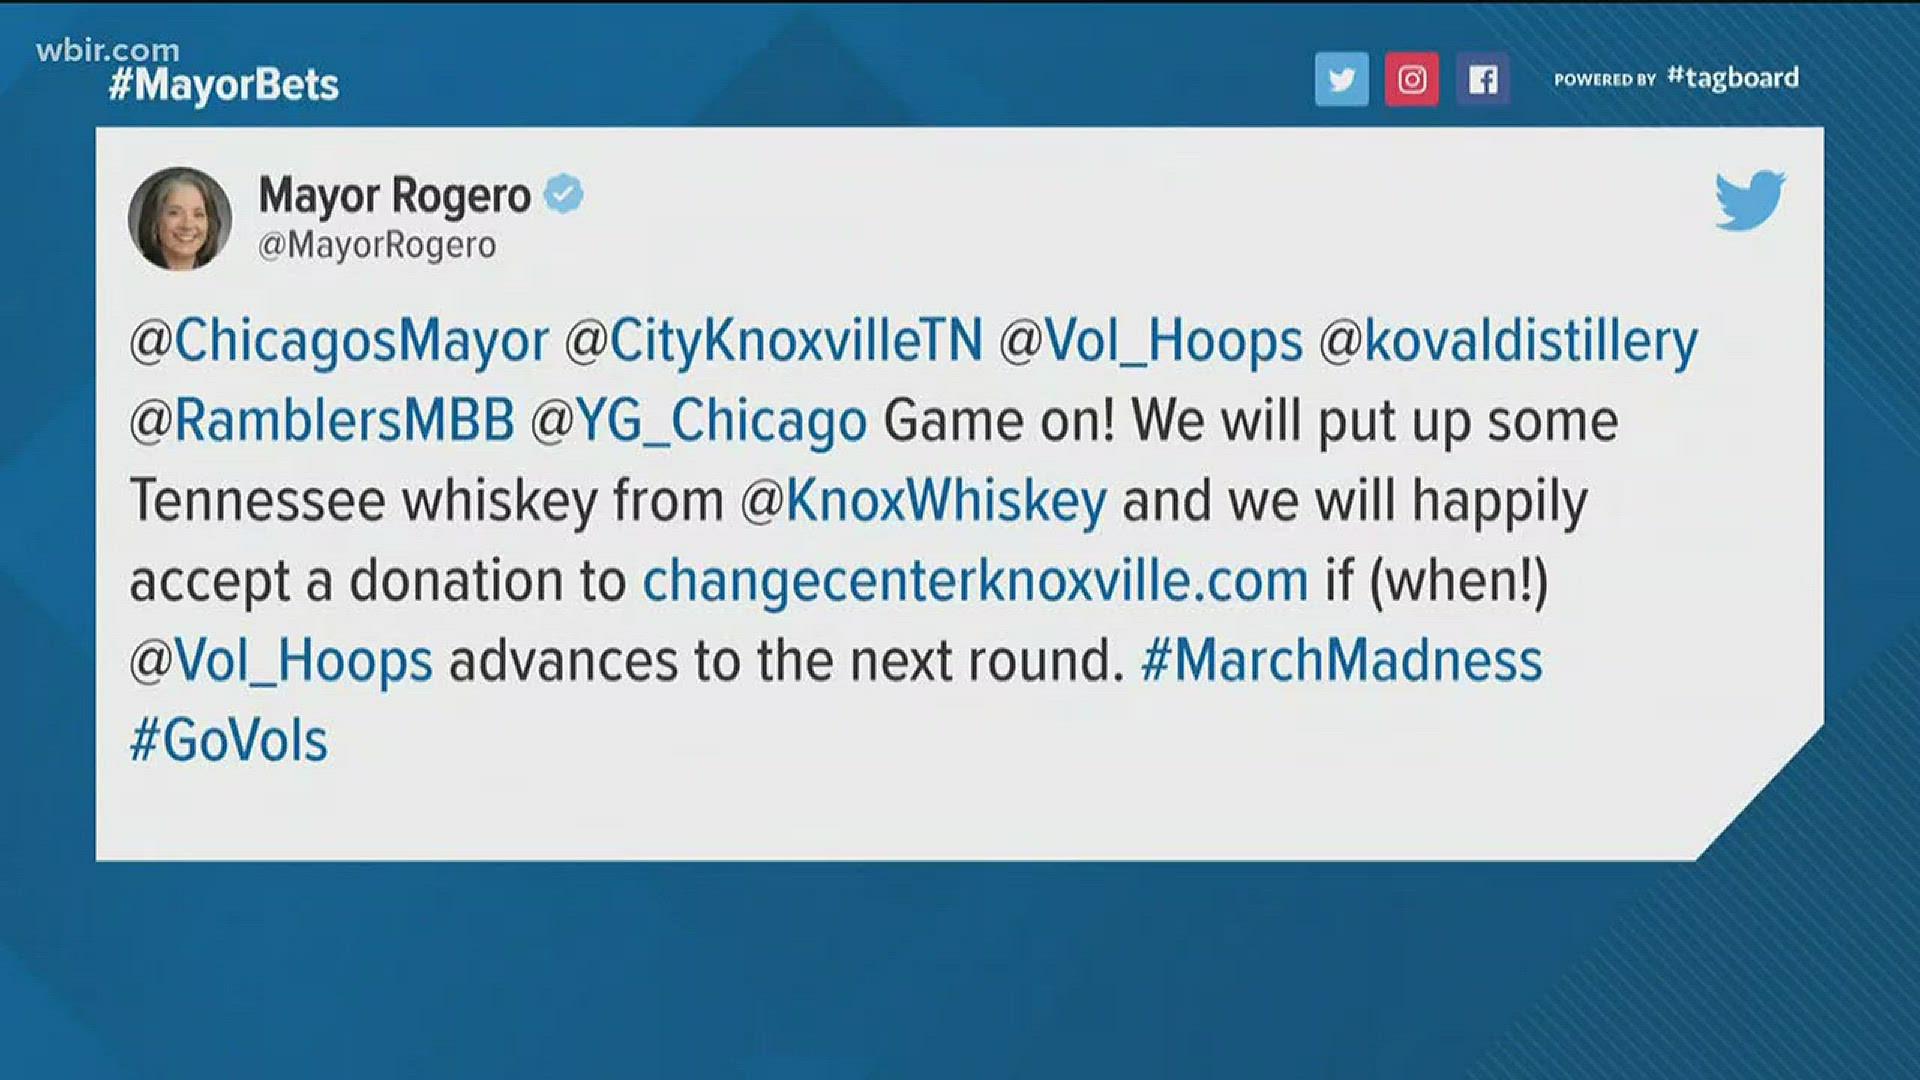 Mayor Rahm Emanuel tweeted at Rogero Saturday saying, if the Vols win, he'll send alcohol from a local distillery to Knoxville.